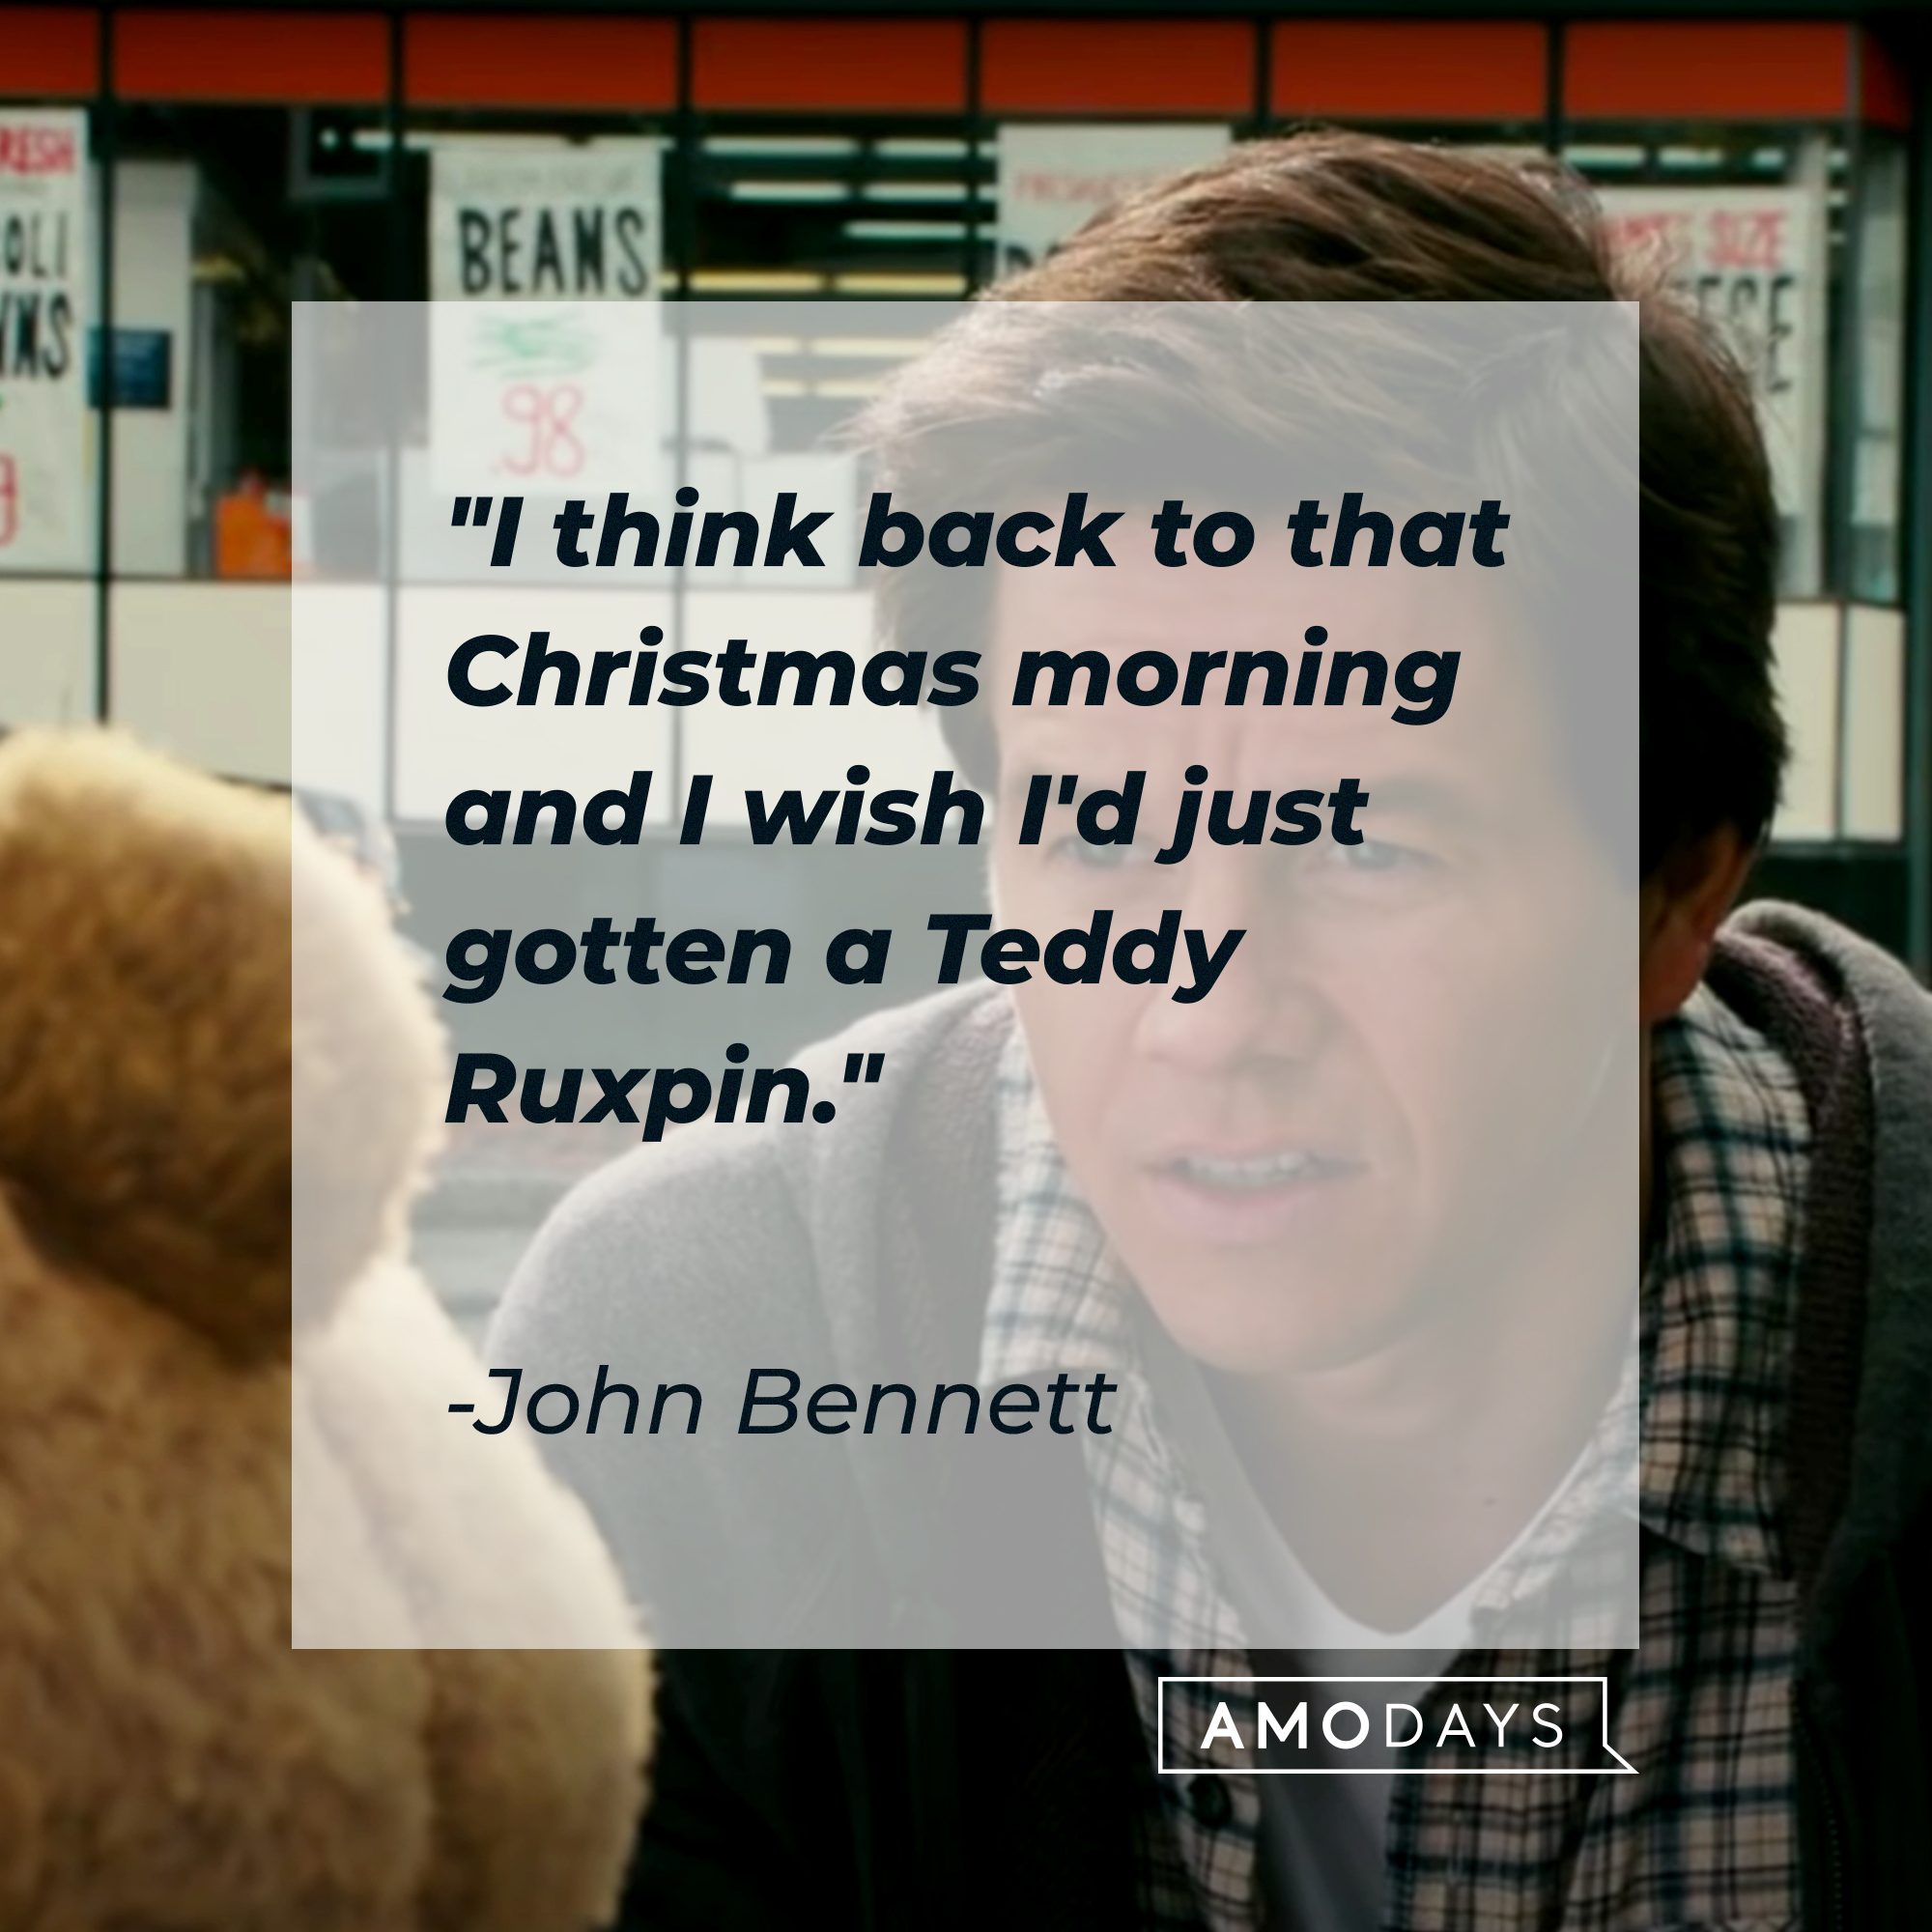 John Bennett's quote: "I think back to that Christmas morning and I wish I'd just gotten a Teddy Ruxpin." | Source: facebook.com/tedisreal